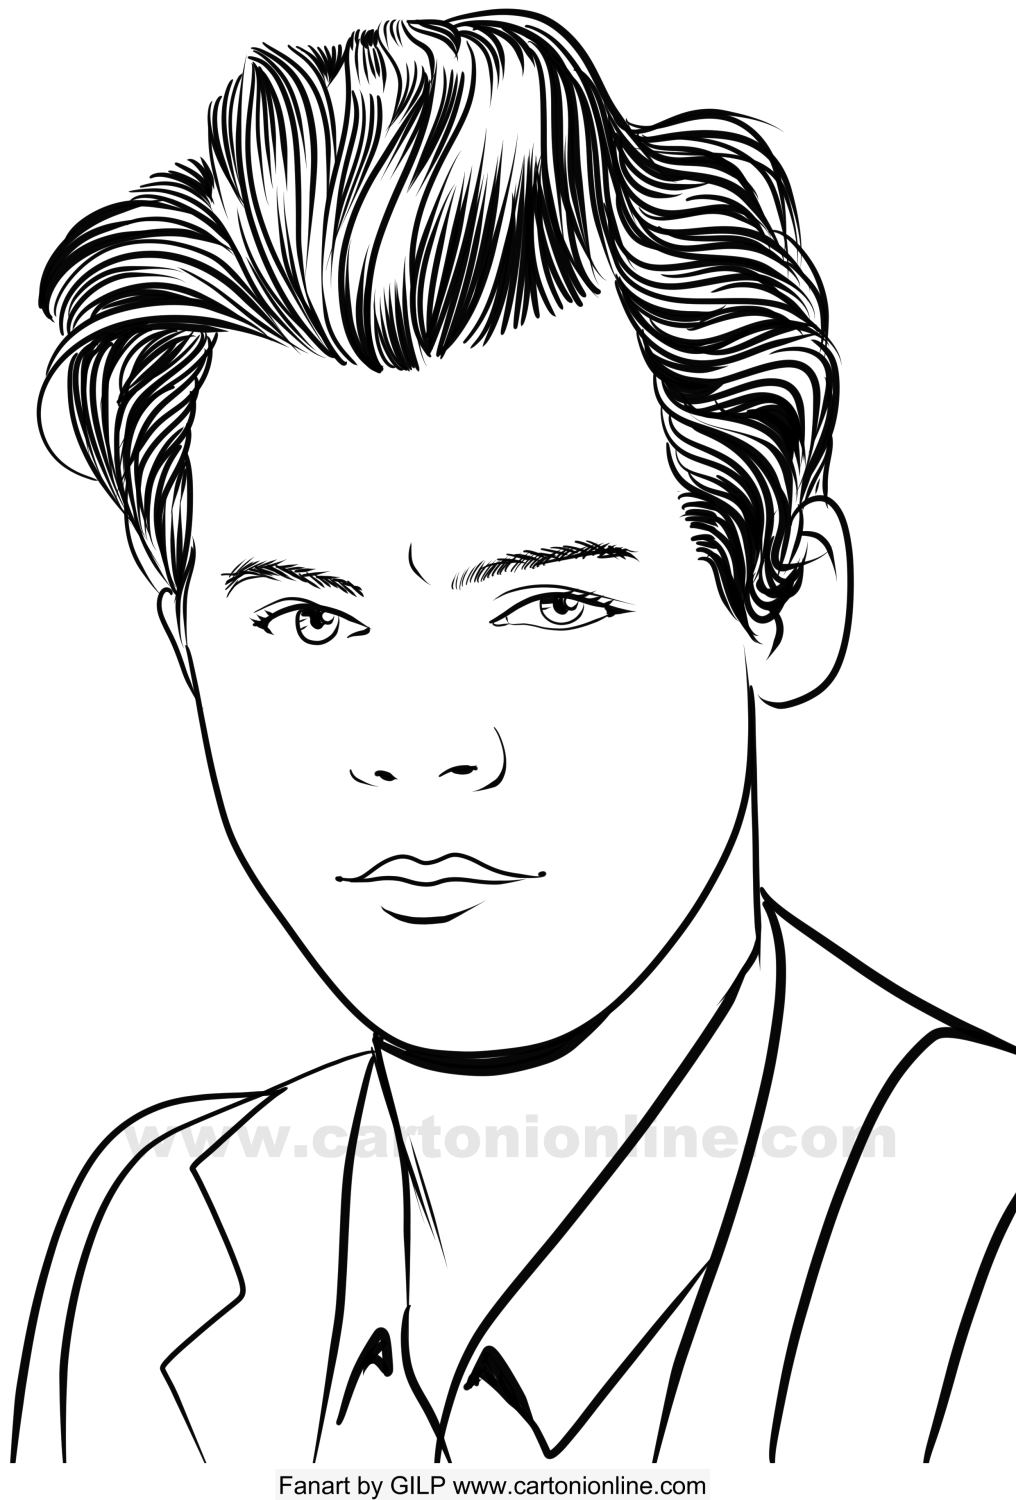 Drawing of Harry Styles 09 from One Direction to print and coloring